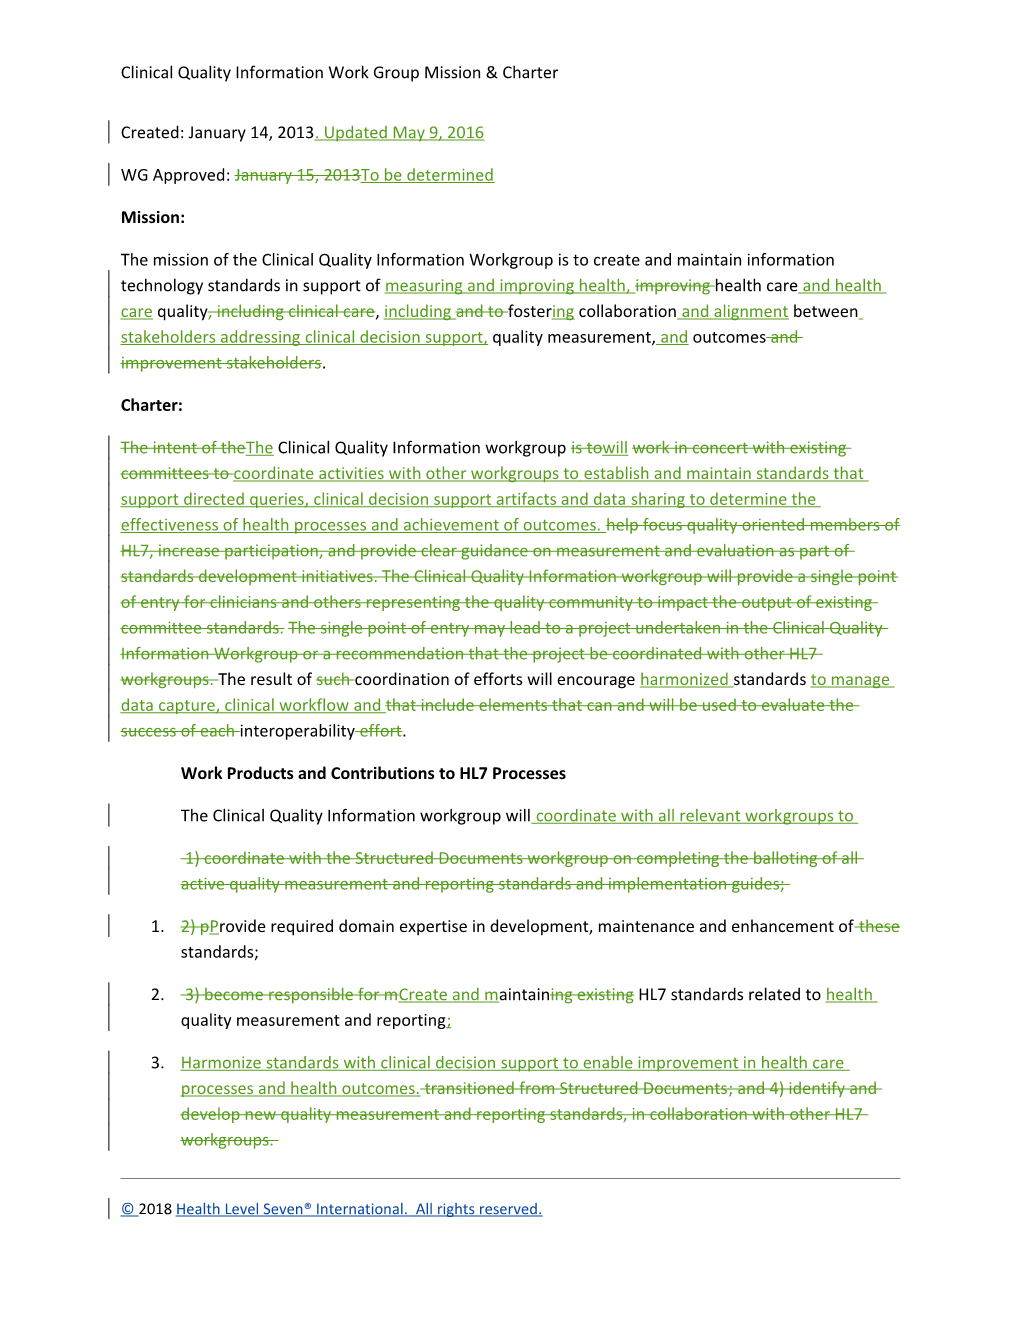 Work Group Mission and Charter (WG M&C) Statement Guidelines